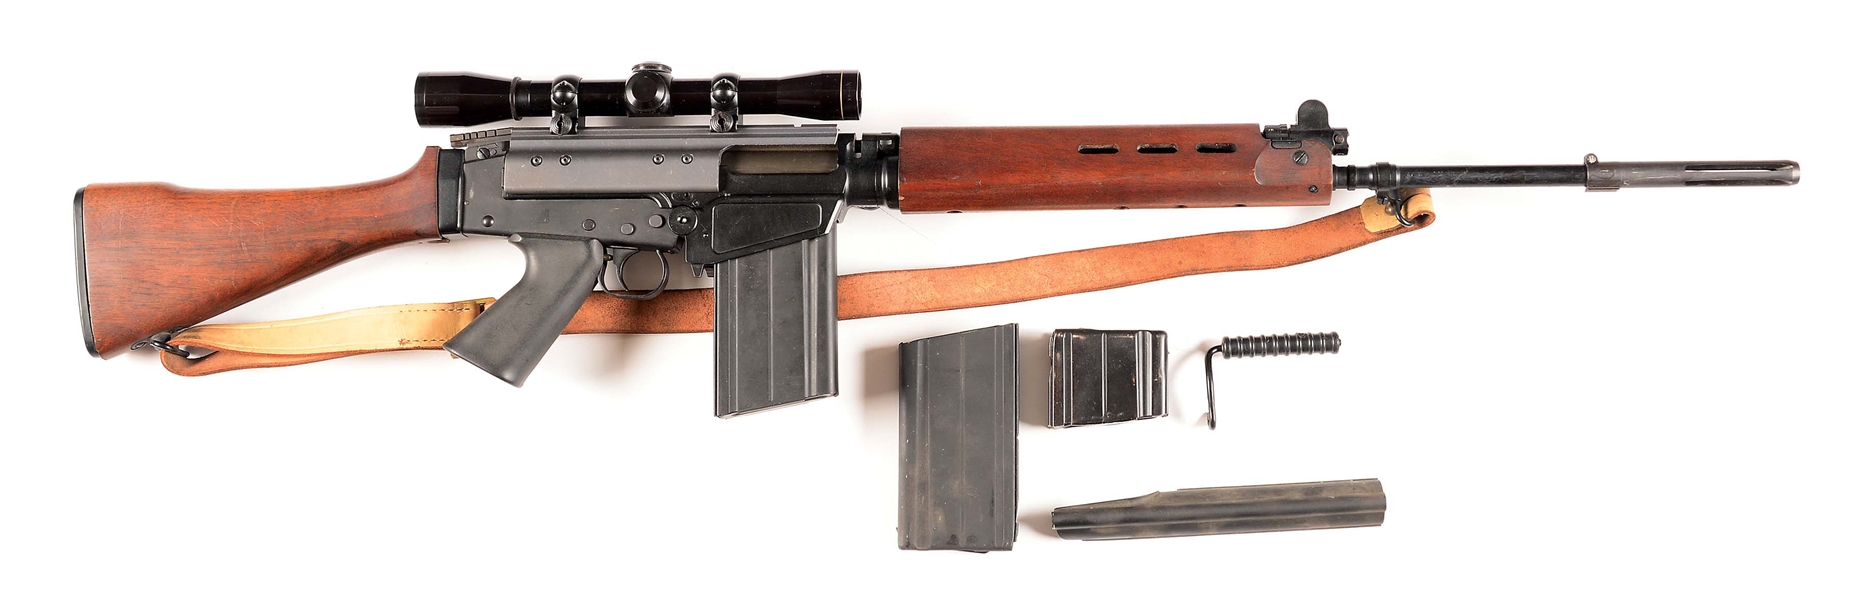 (C) HIGHLY DESIRABLE AND SCARCE “G” SERIES FN FAL SEMI-AUTO RIFLE AS IMPORTED BY BROWNING ARMS CO BETWEEN 1959 - 1963.